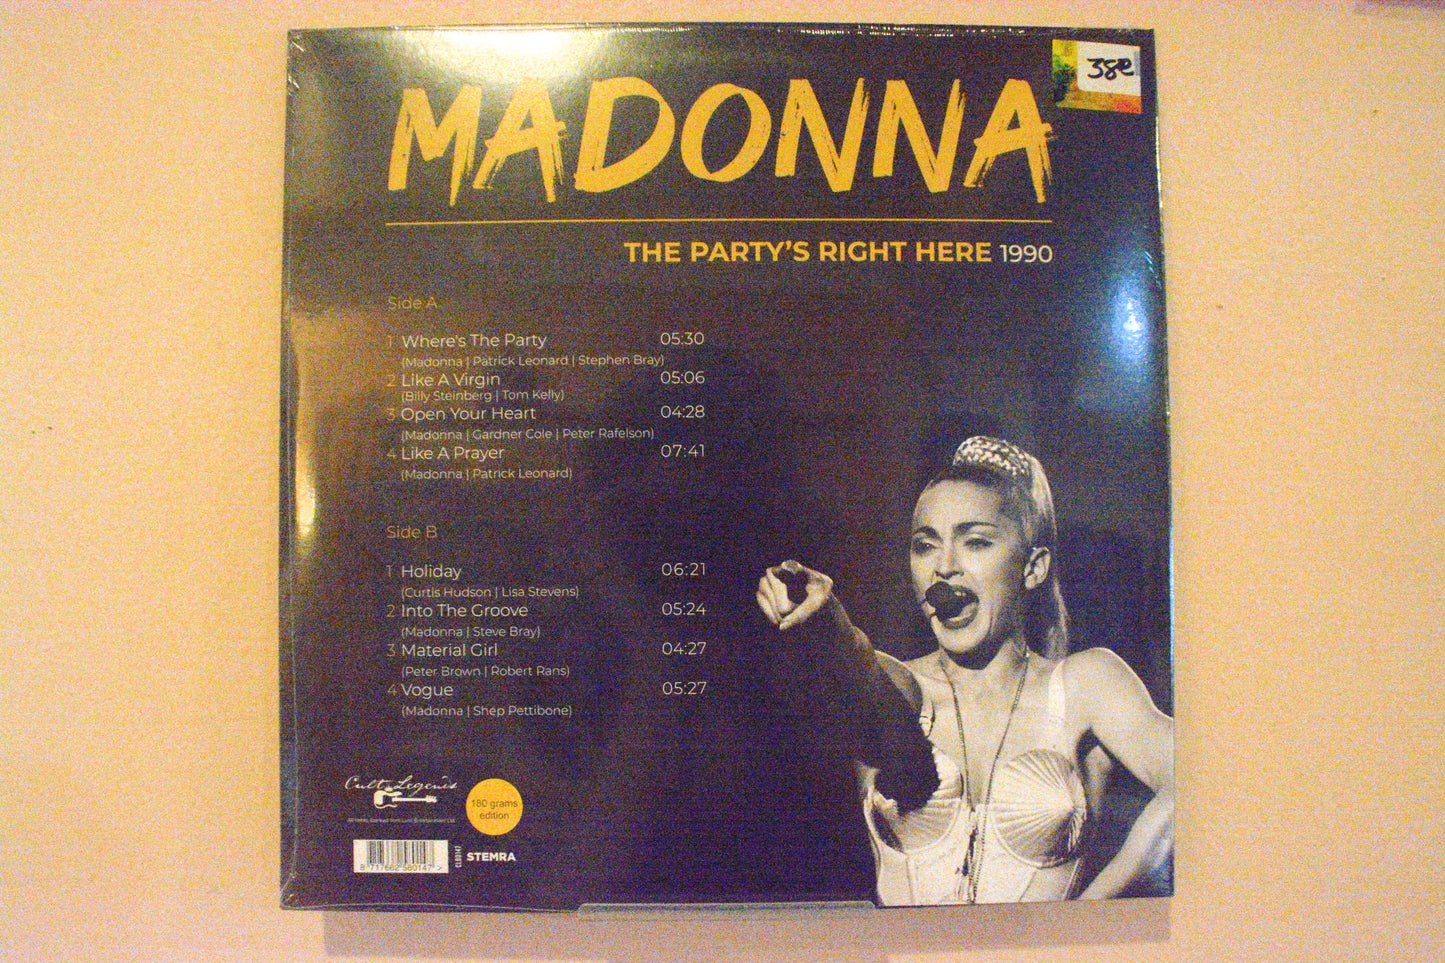 Madonna - The Party's Right Here 1990 LP